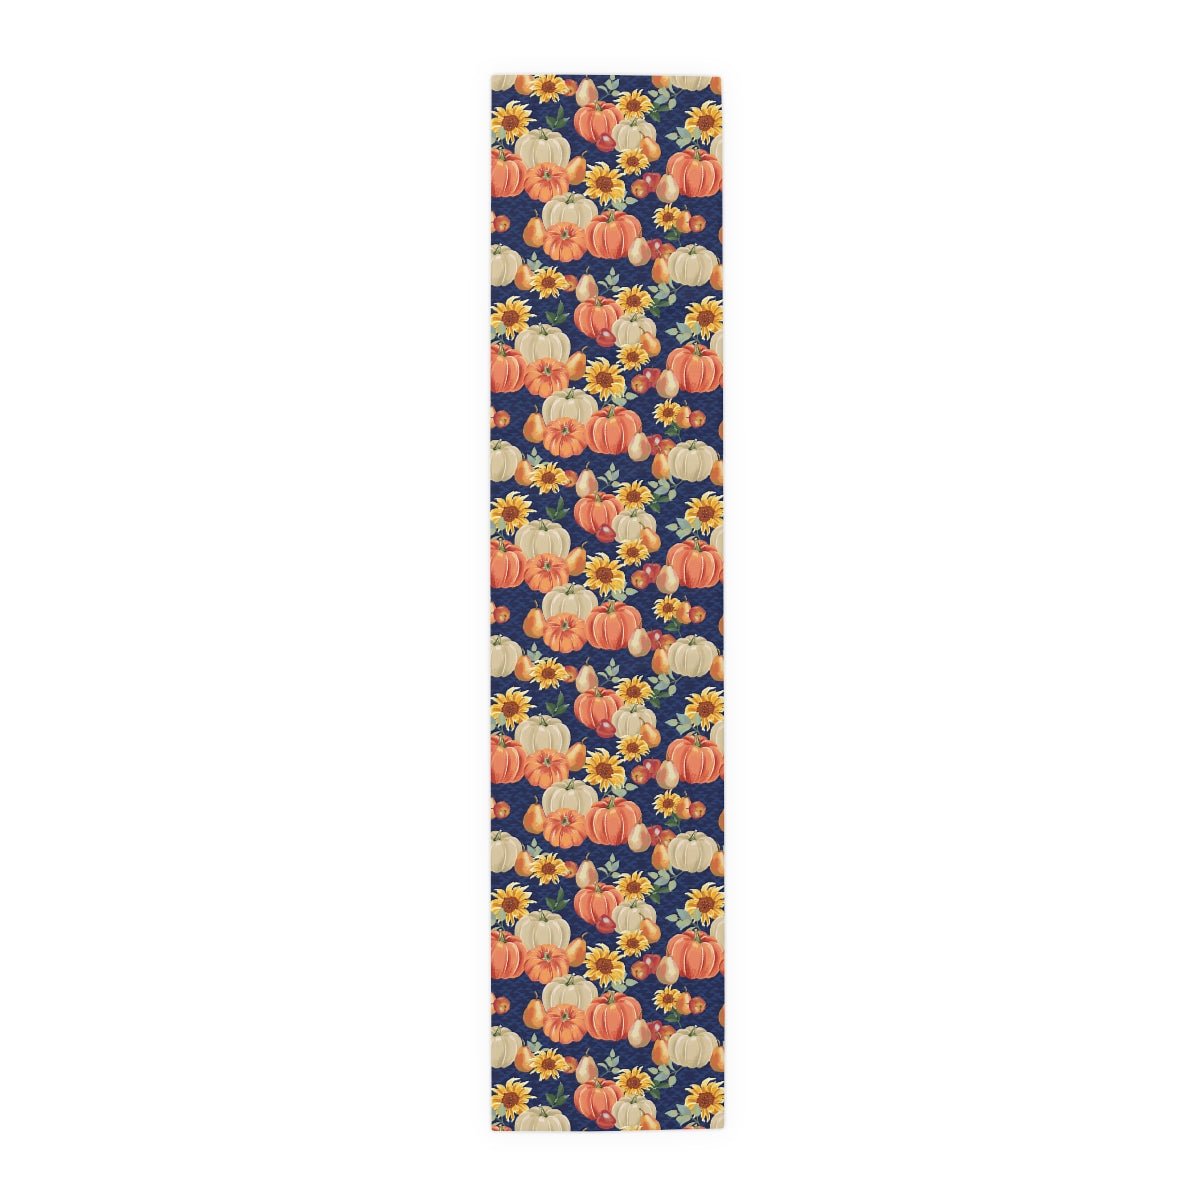 Fall Pumpkins and Sunflowers Table Runner - Puffin Lime